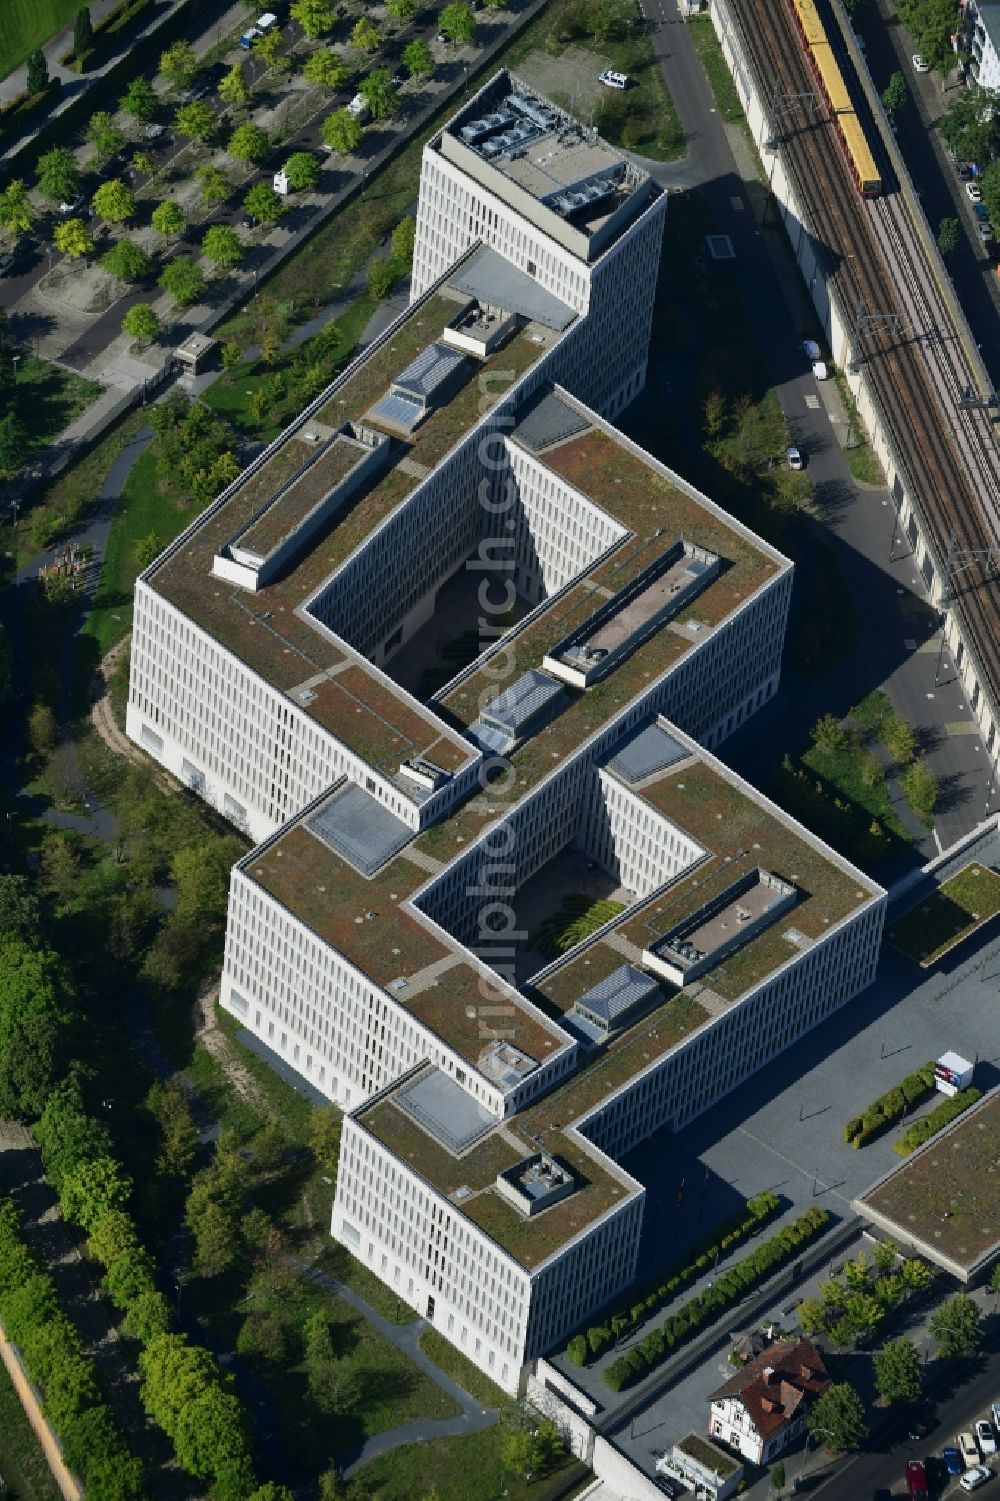 Berlin from above - Federal Ministry of the Interior - Ministry of the Interior in the district of Moabit in Berlin, Germany